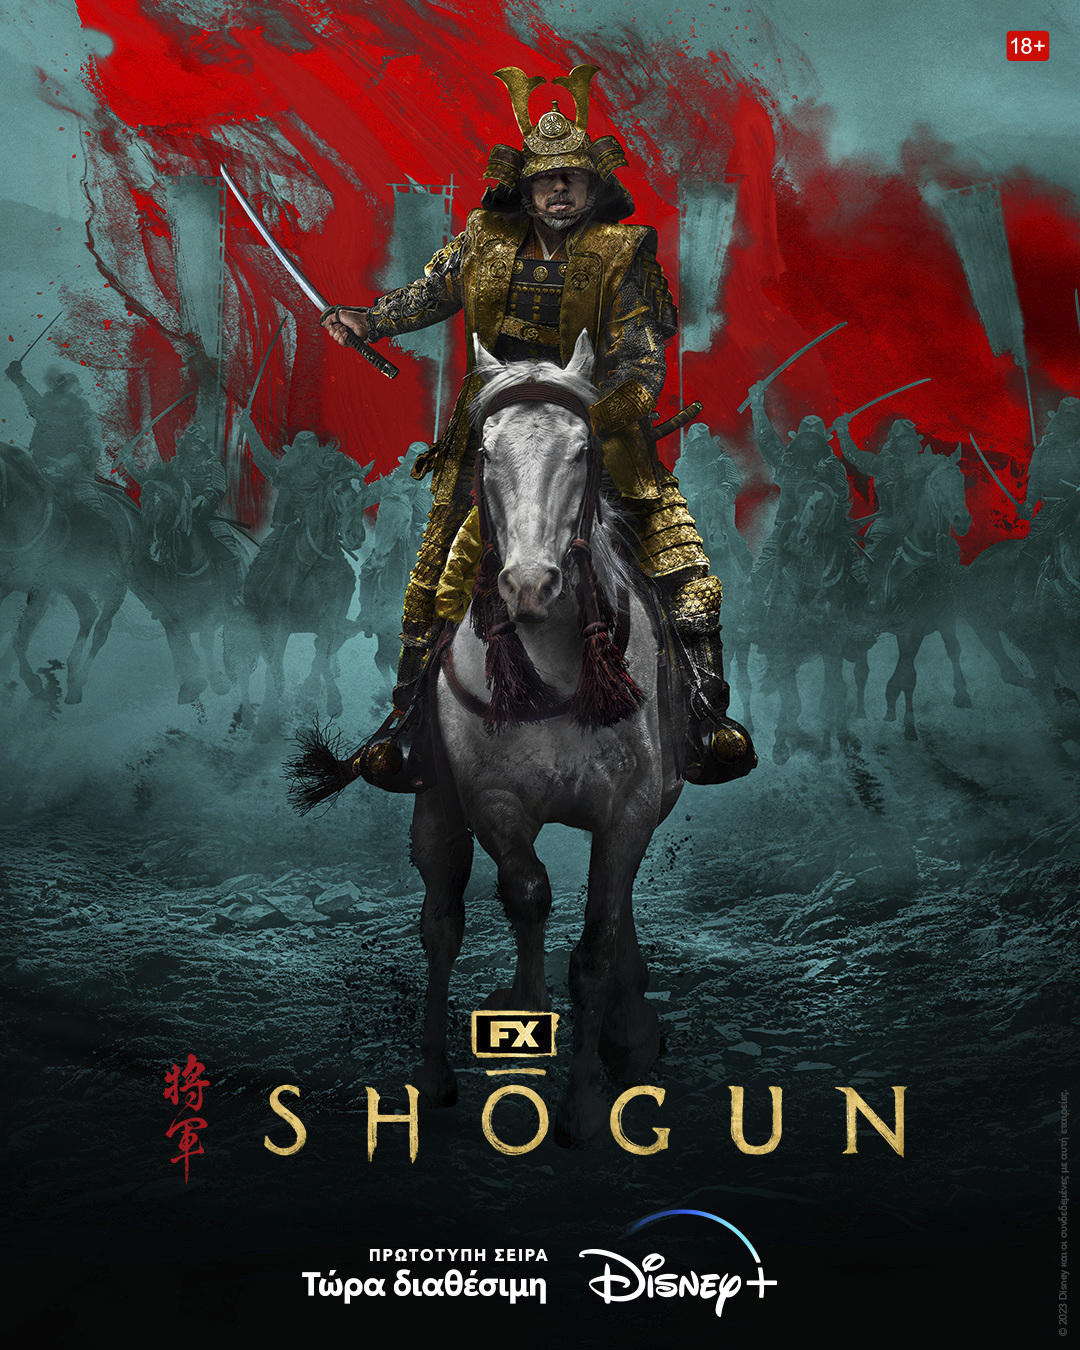 Strap yourself in for a wild adventure in feudal Japan.